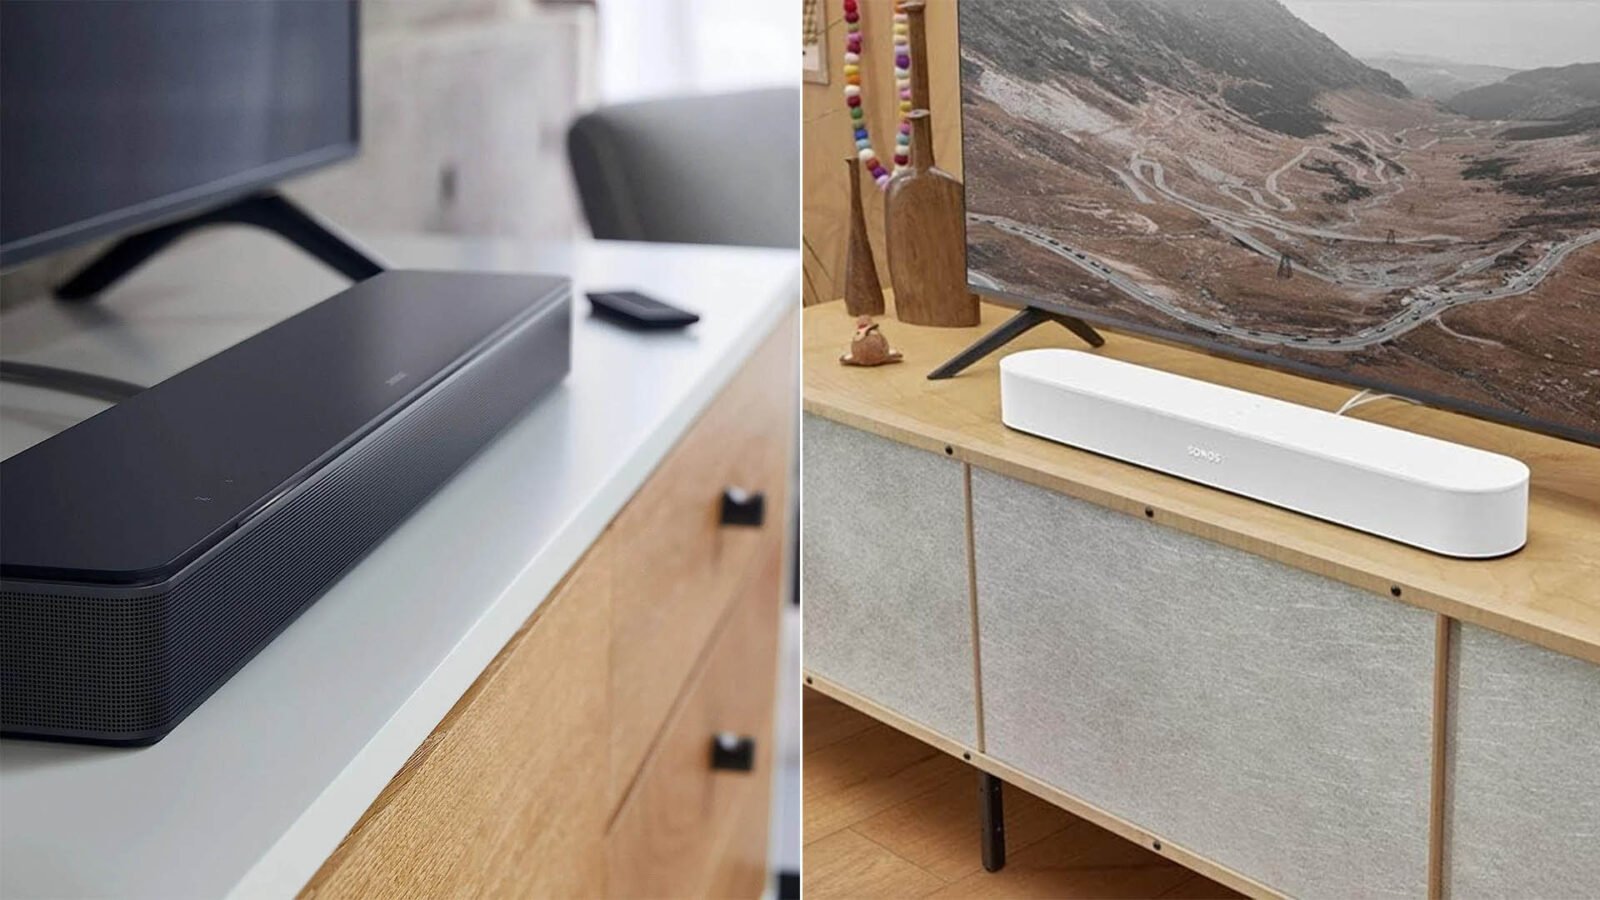 A side-by-side display of two of the best cheap soundbars, showcasing their sleek designs that blend seamlessly with home decor while offering quality sound.